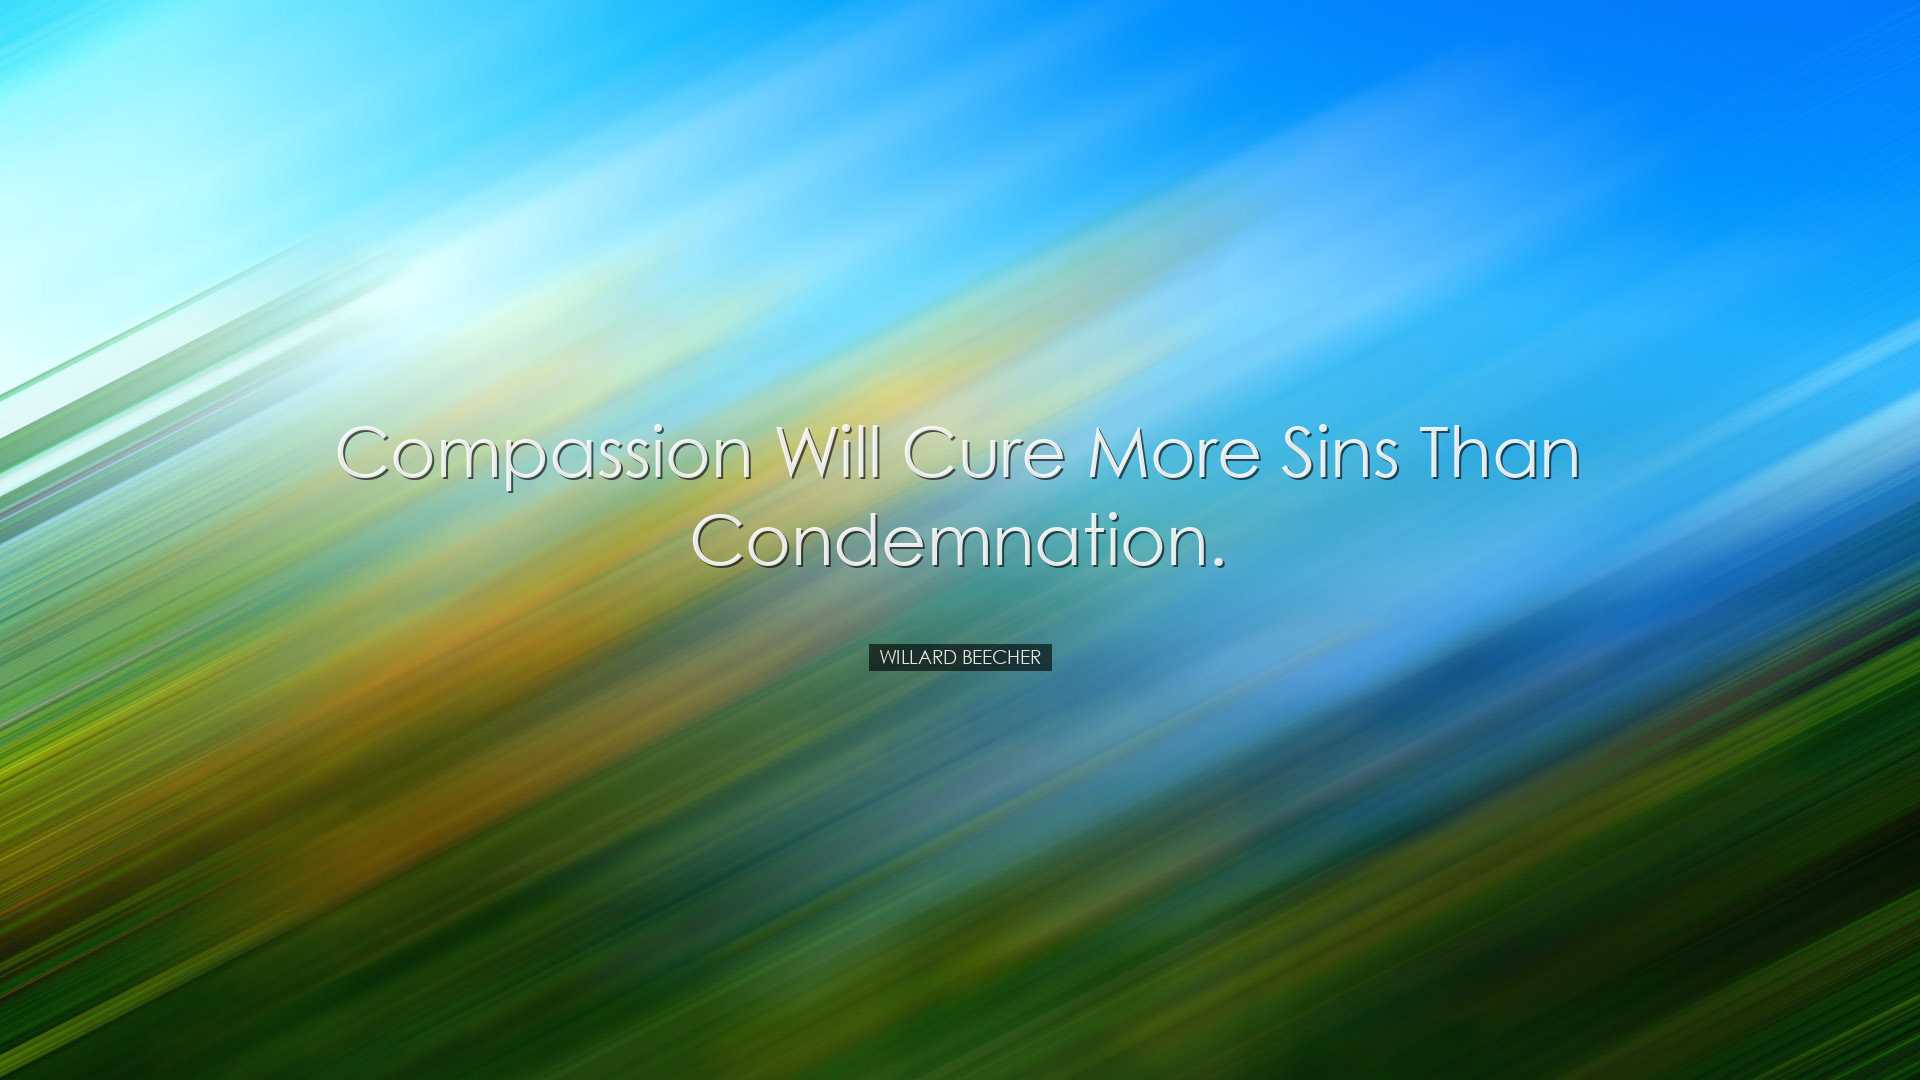 Compassion will cure more sins than condemnation. - Willard Beeche